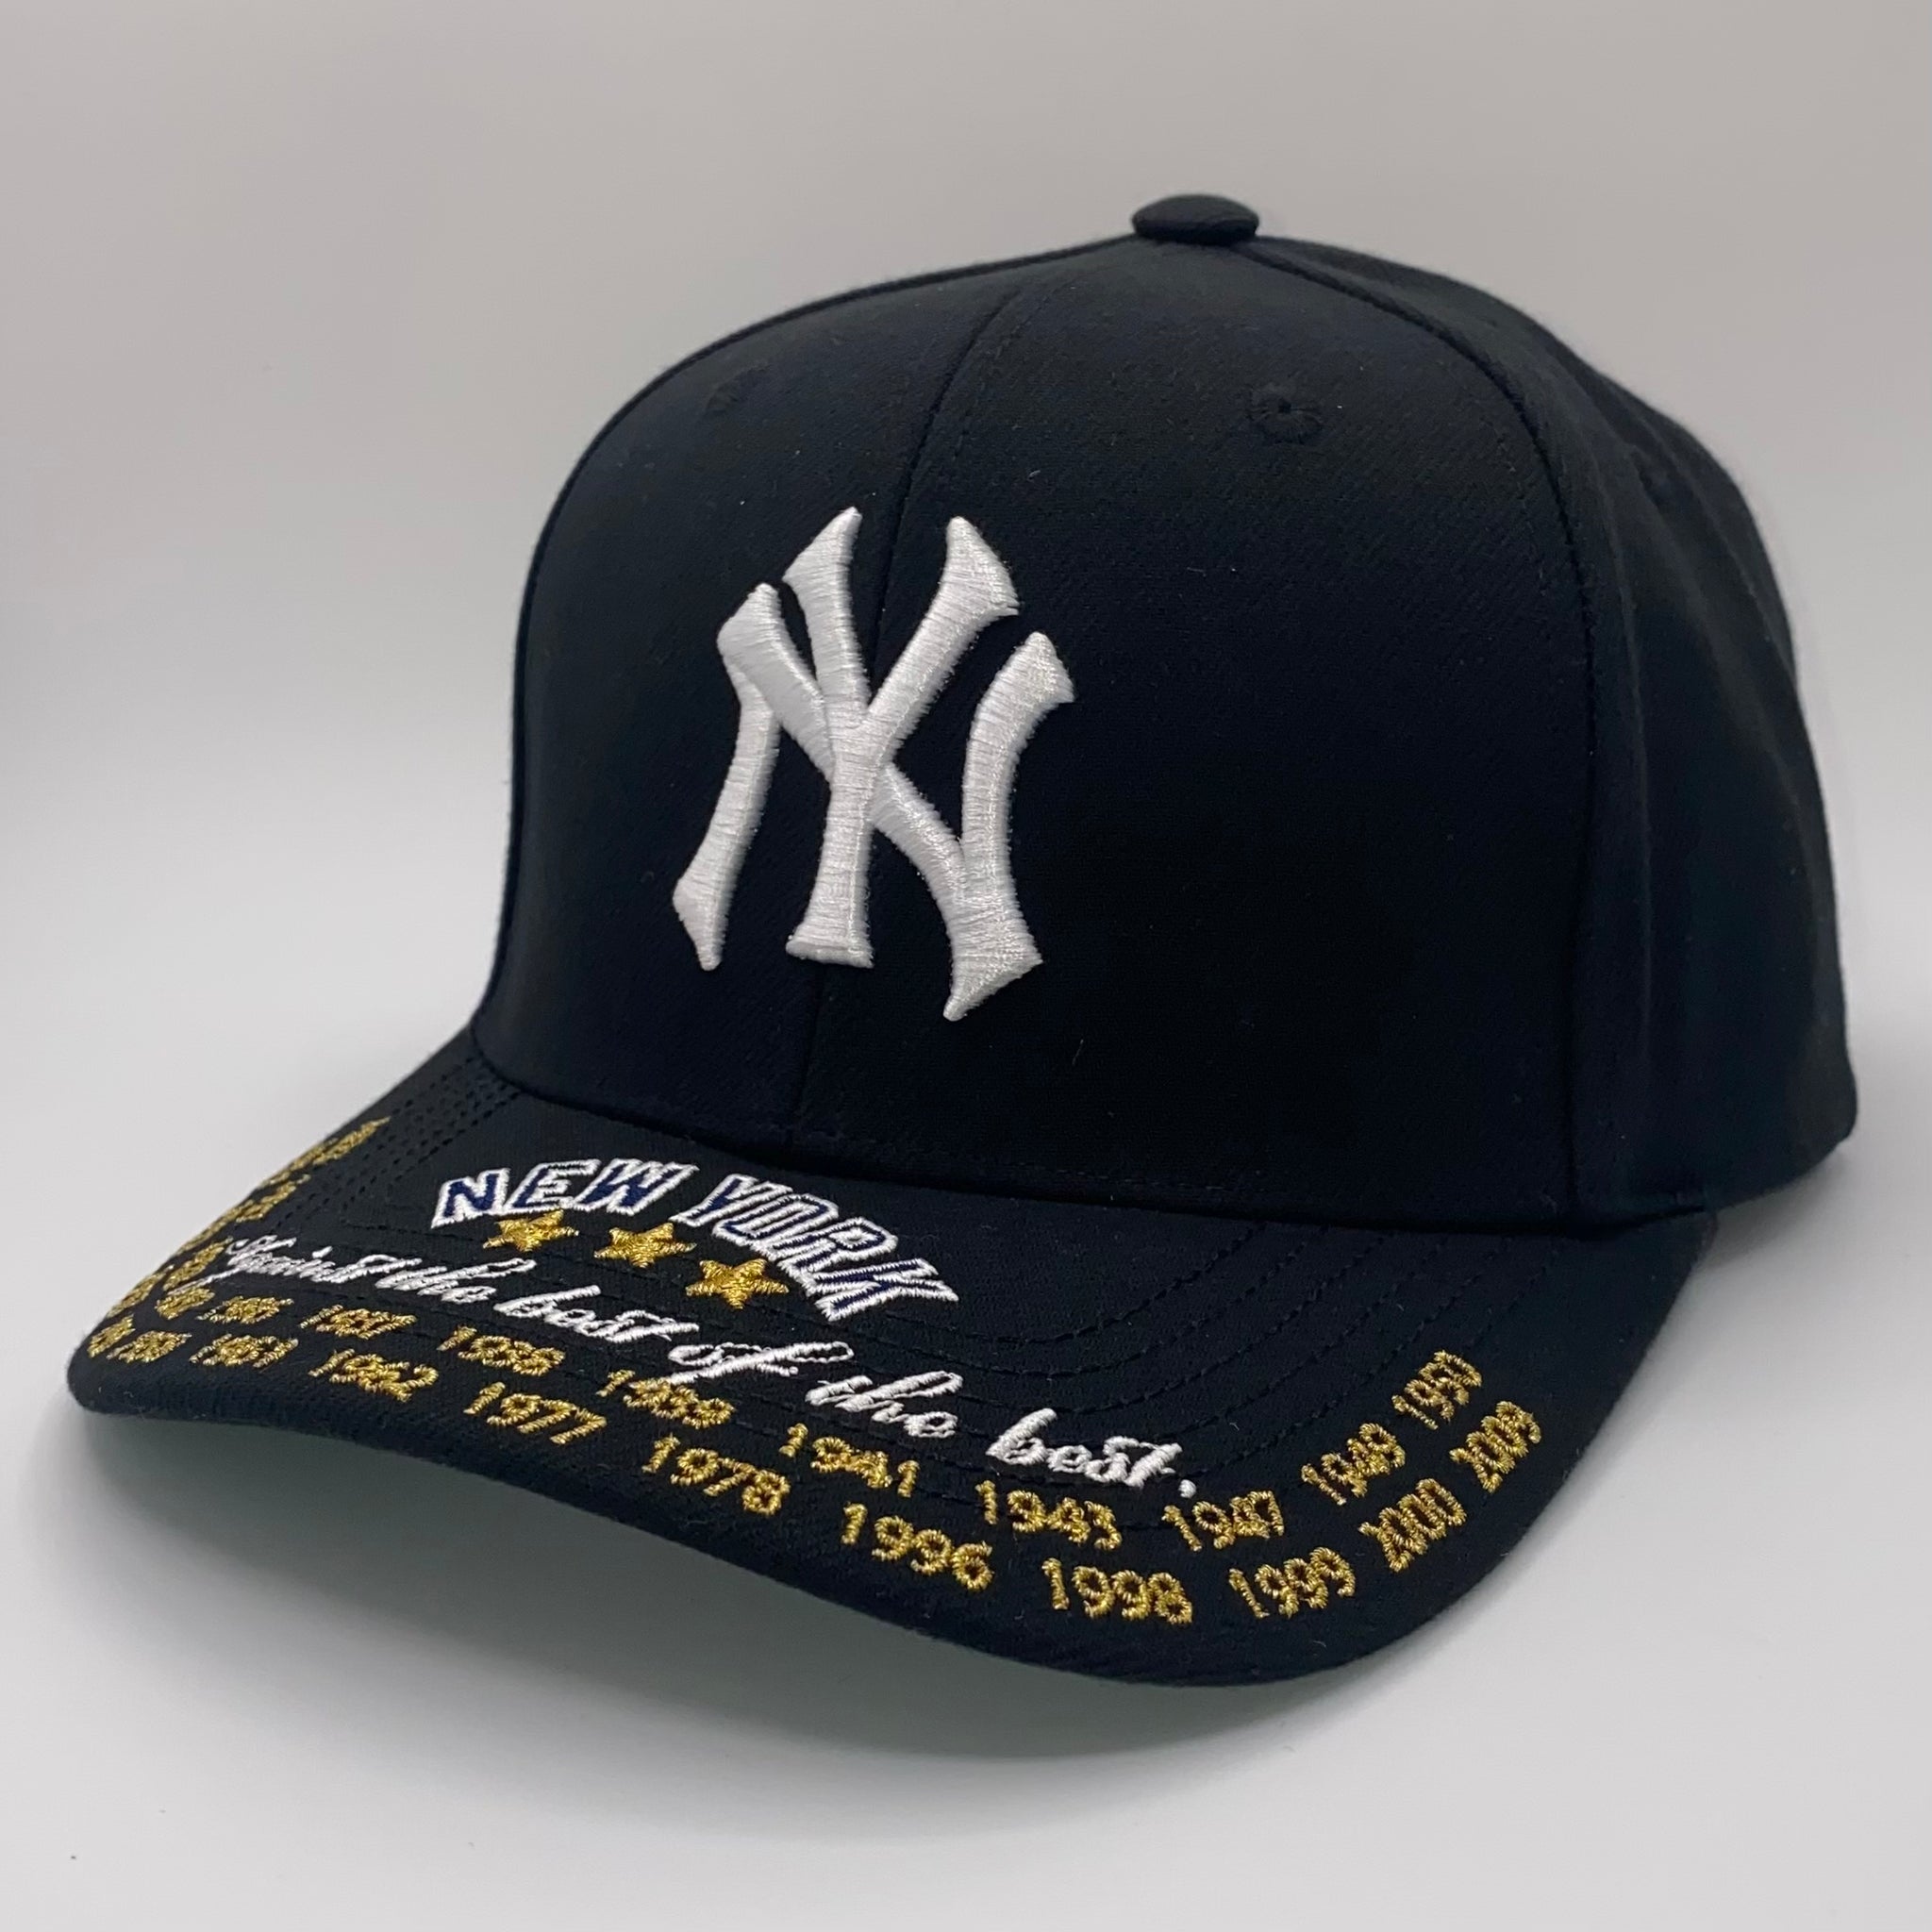 New York Yankees "Against the Best of the Best" Snapback Hat